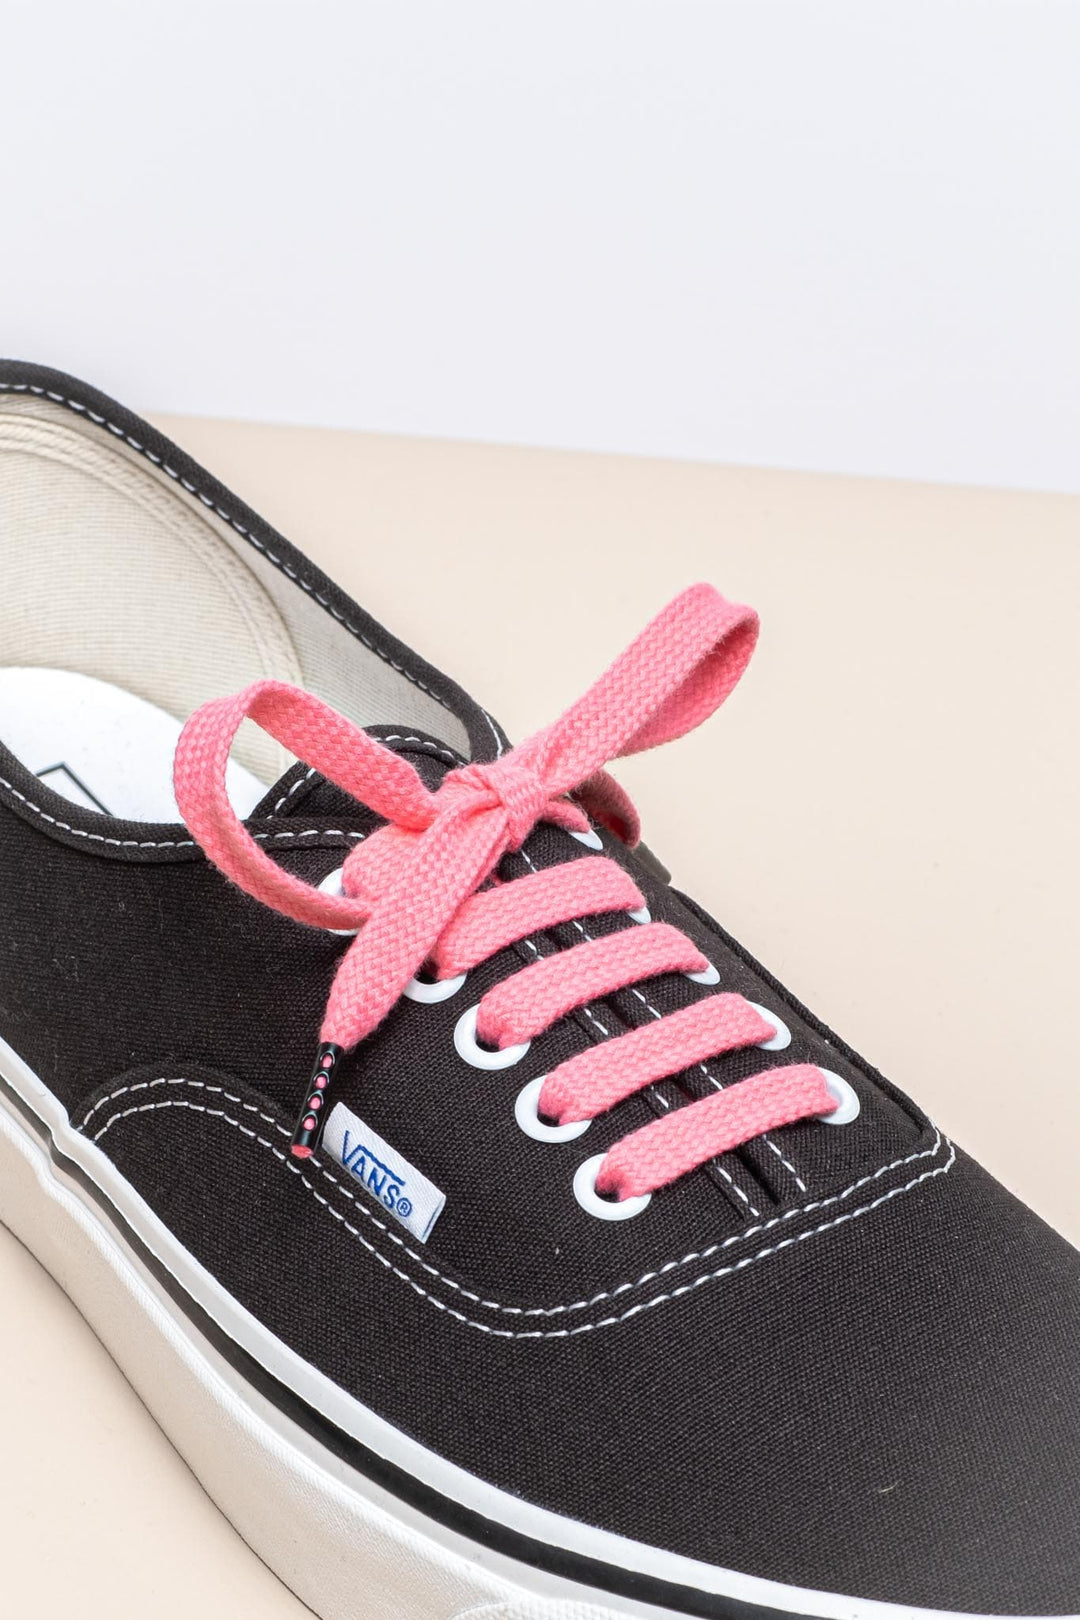 Pink - Sneaker Laces